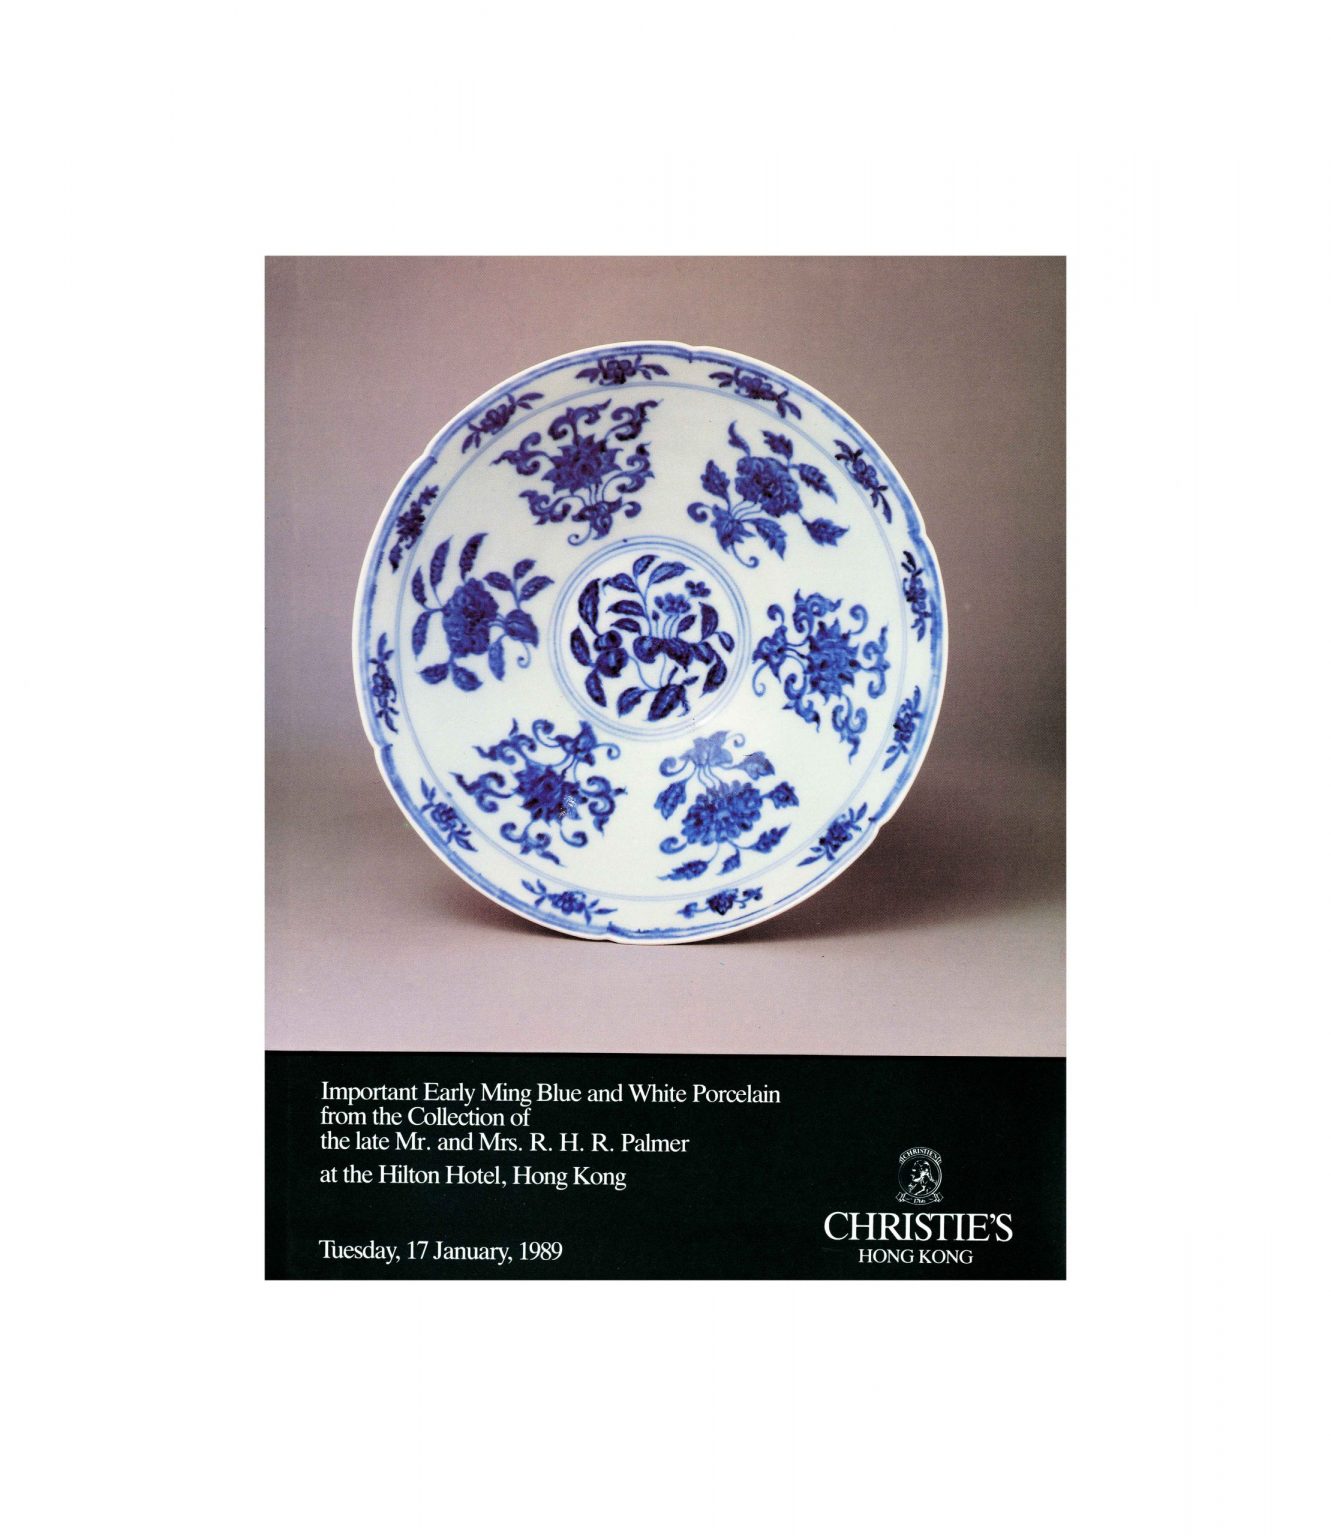 Important Early Blue and White Porcelain from the collection of the late Mr. and Mrs. R.H.R. Palmer